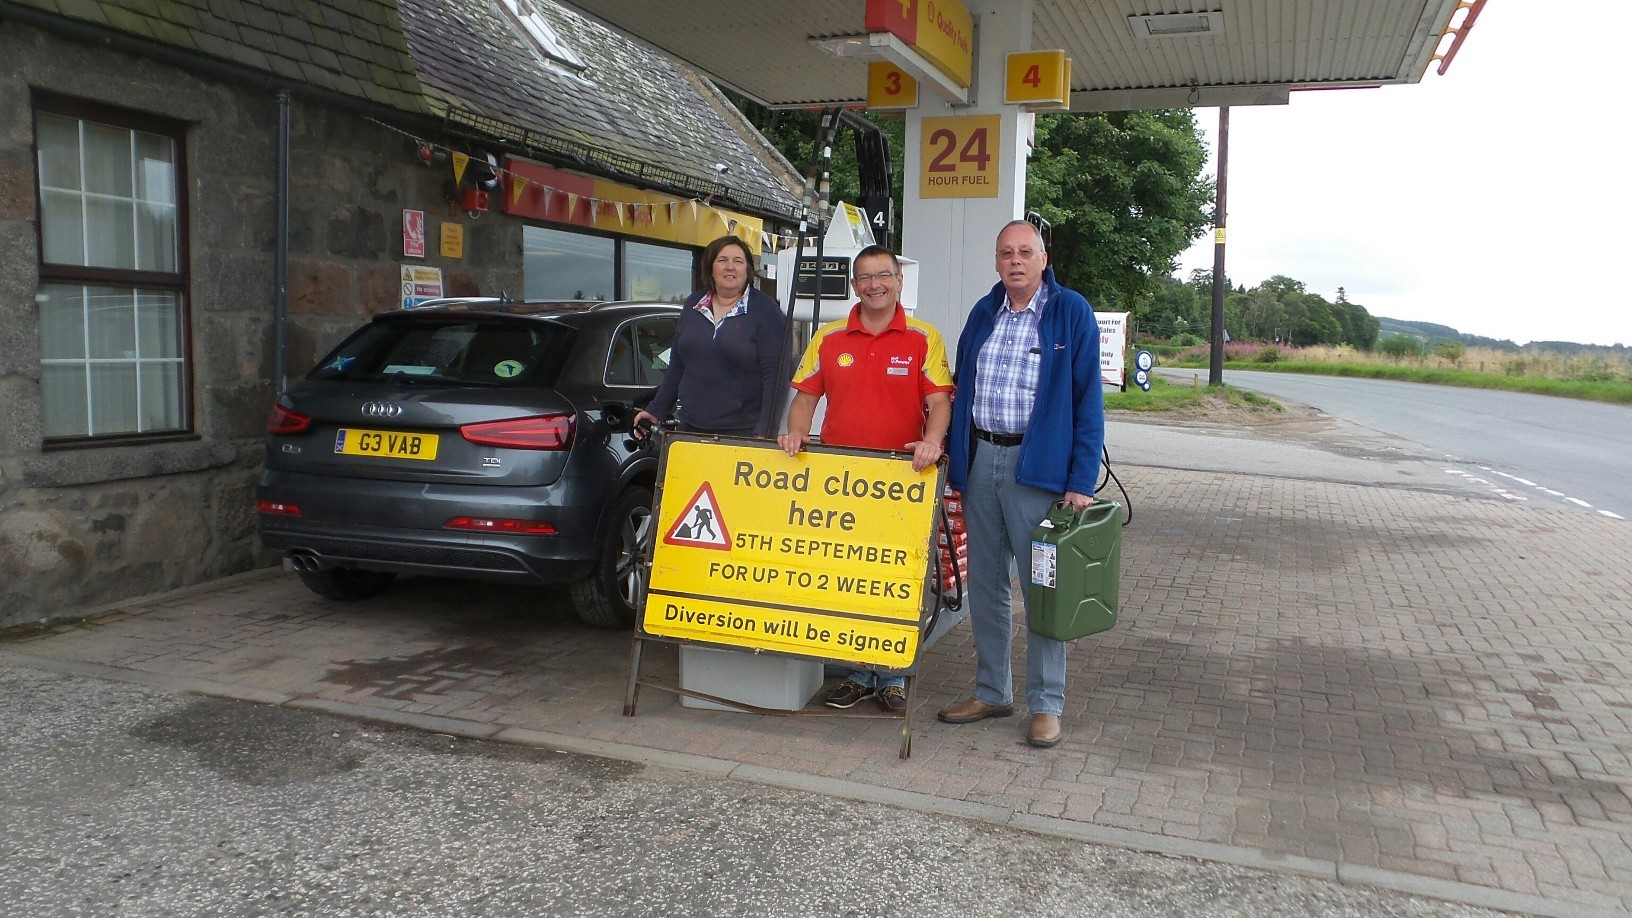 Geva Blackett, petrol station owner Peter Gray and John Lucas, chairman of the Torphins Community Council